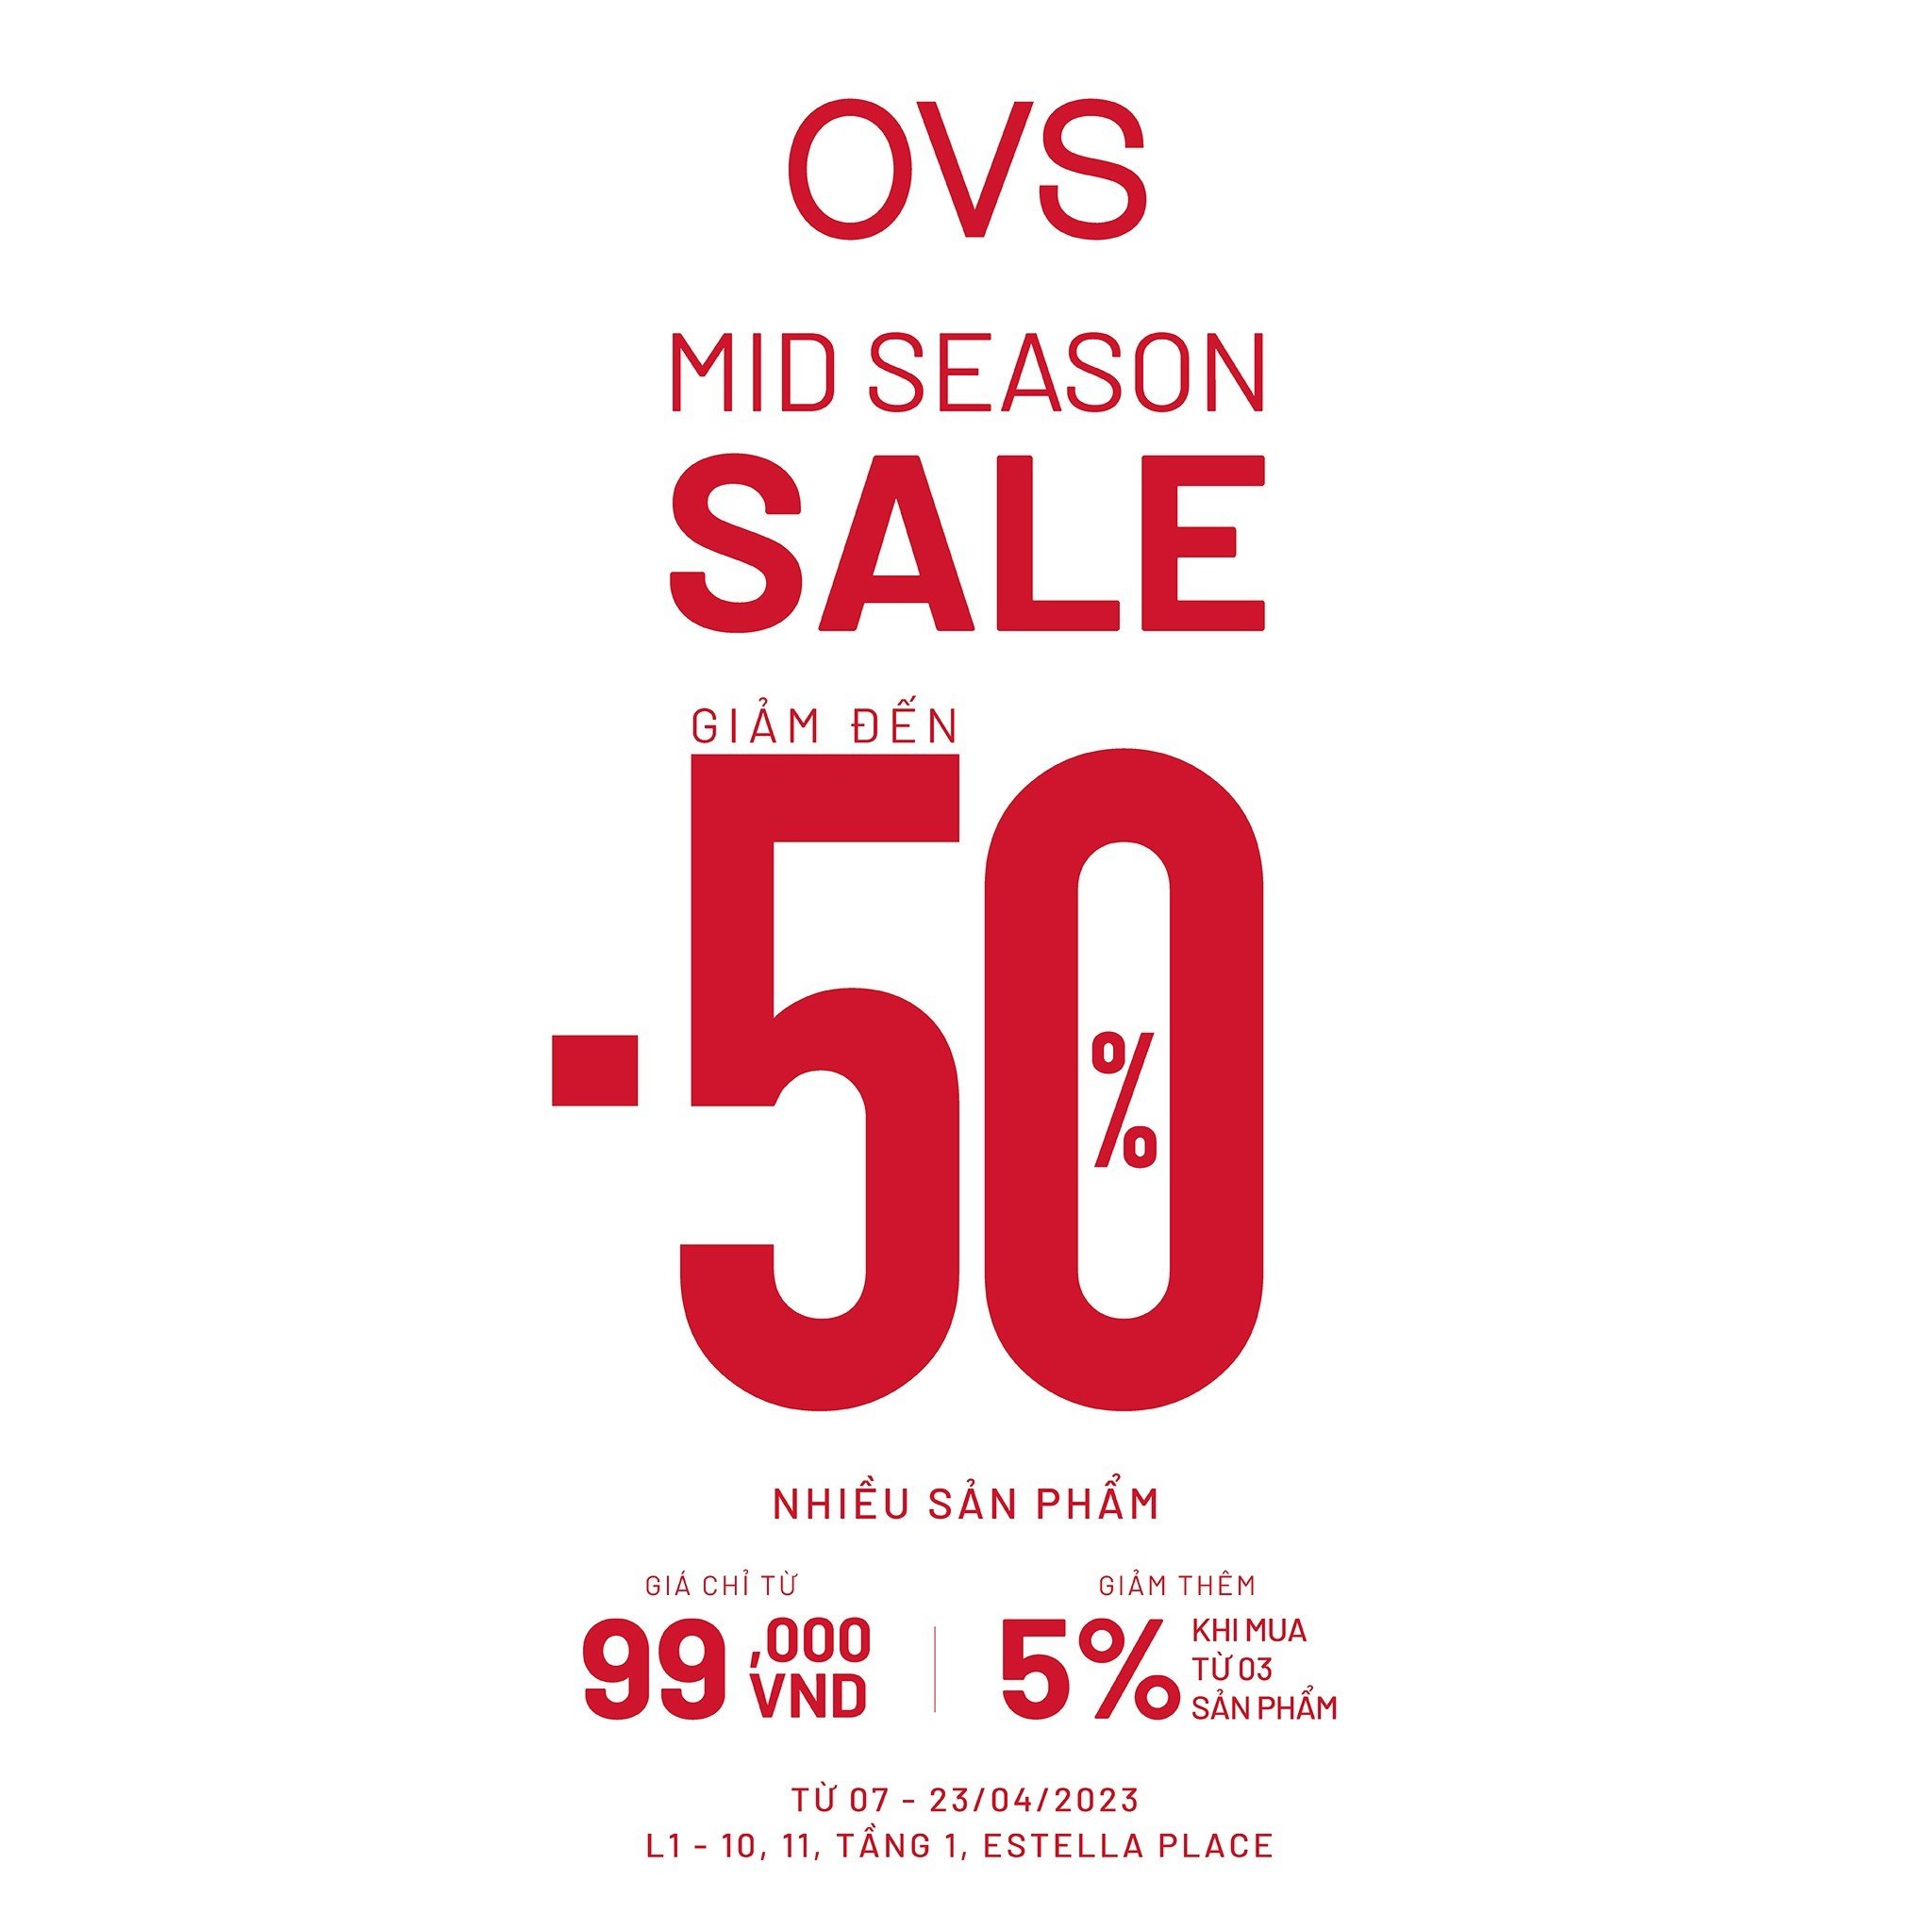 🔥OVS – MID SEASON SALE UP TO 50% - PRICE FROM 99K